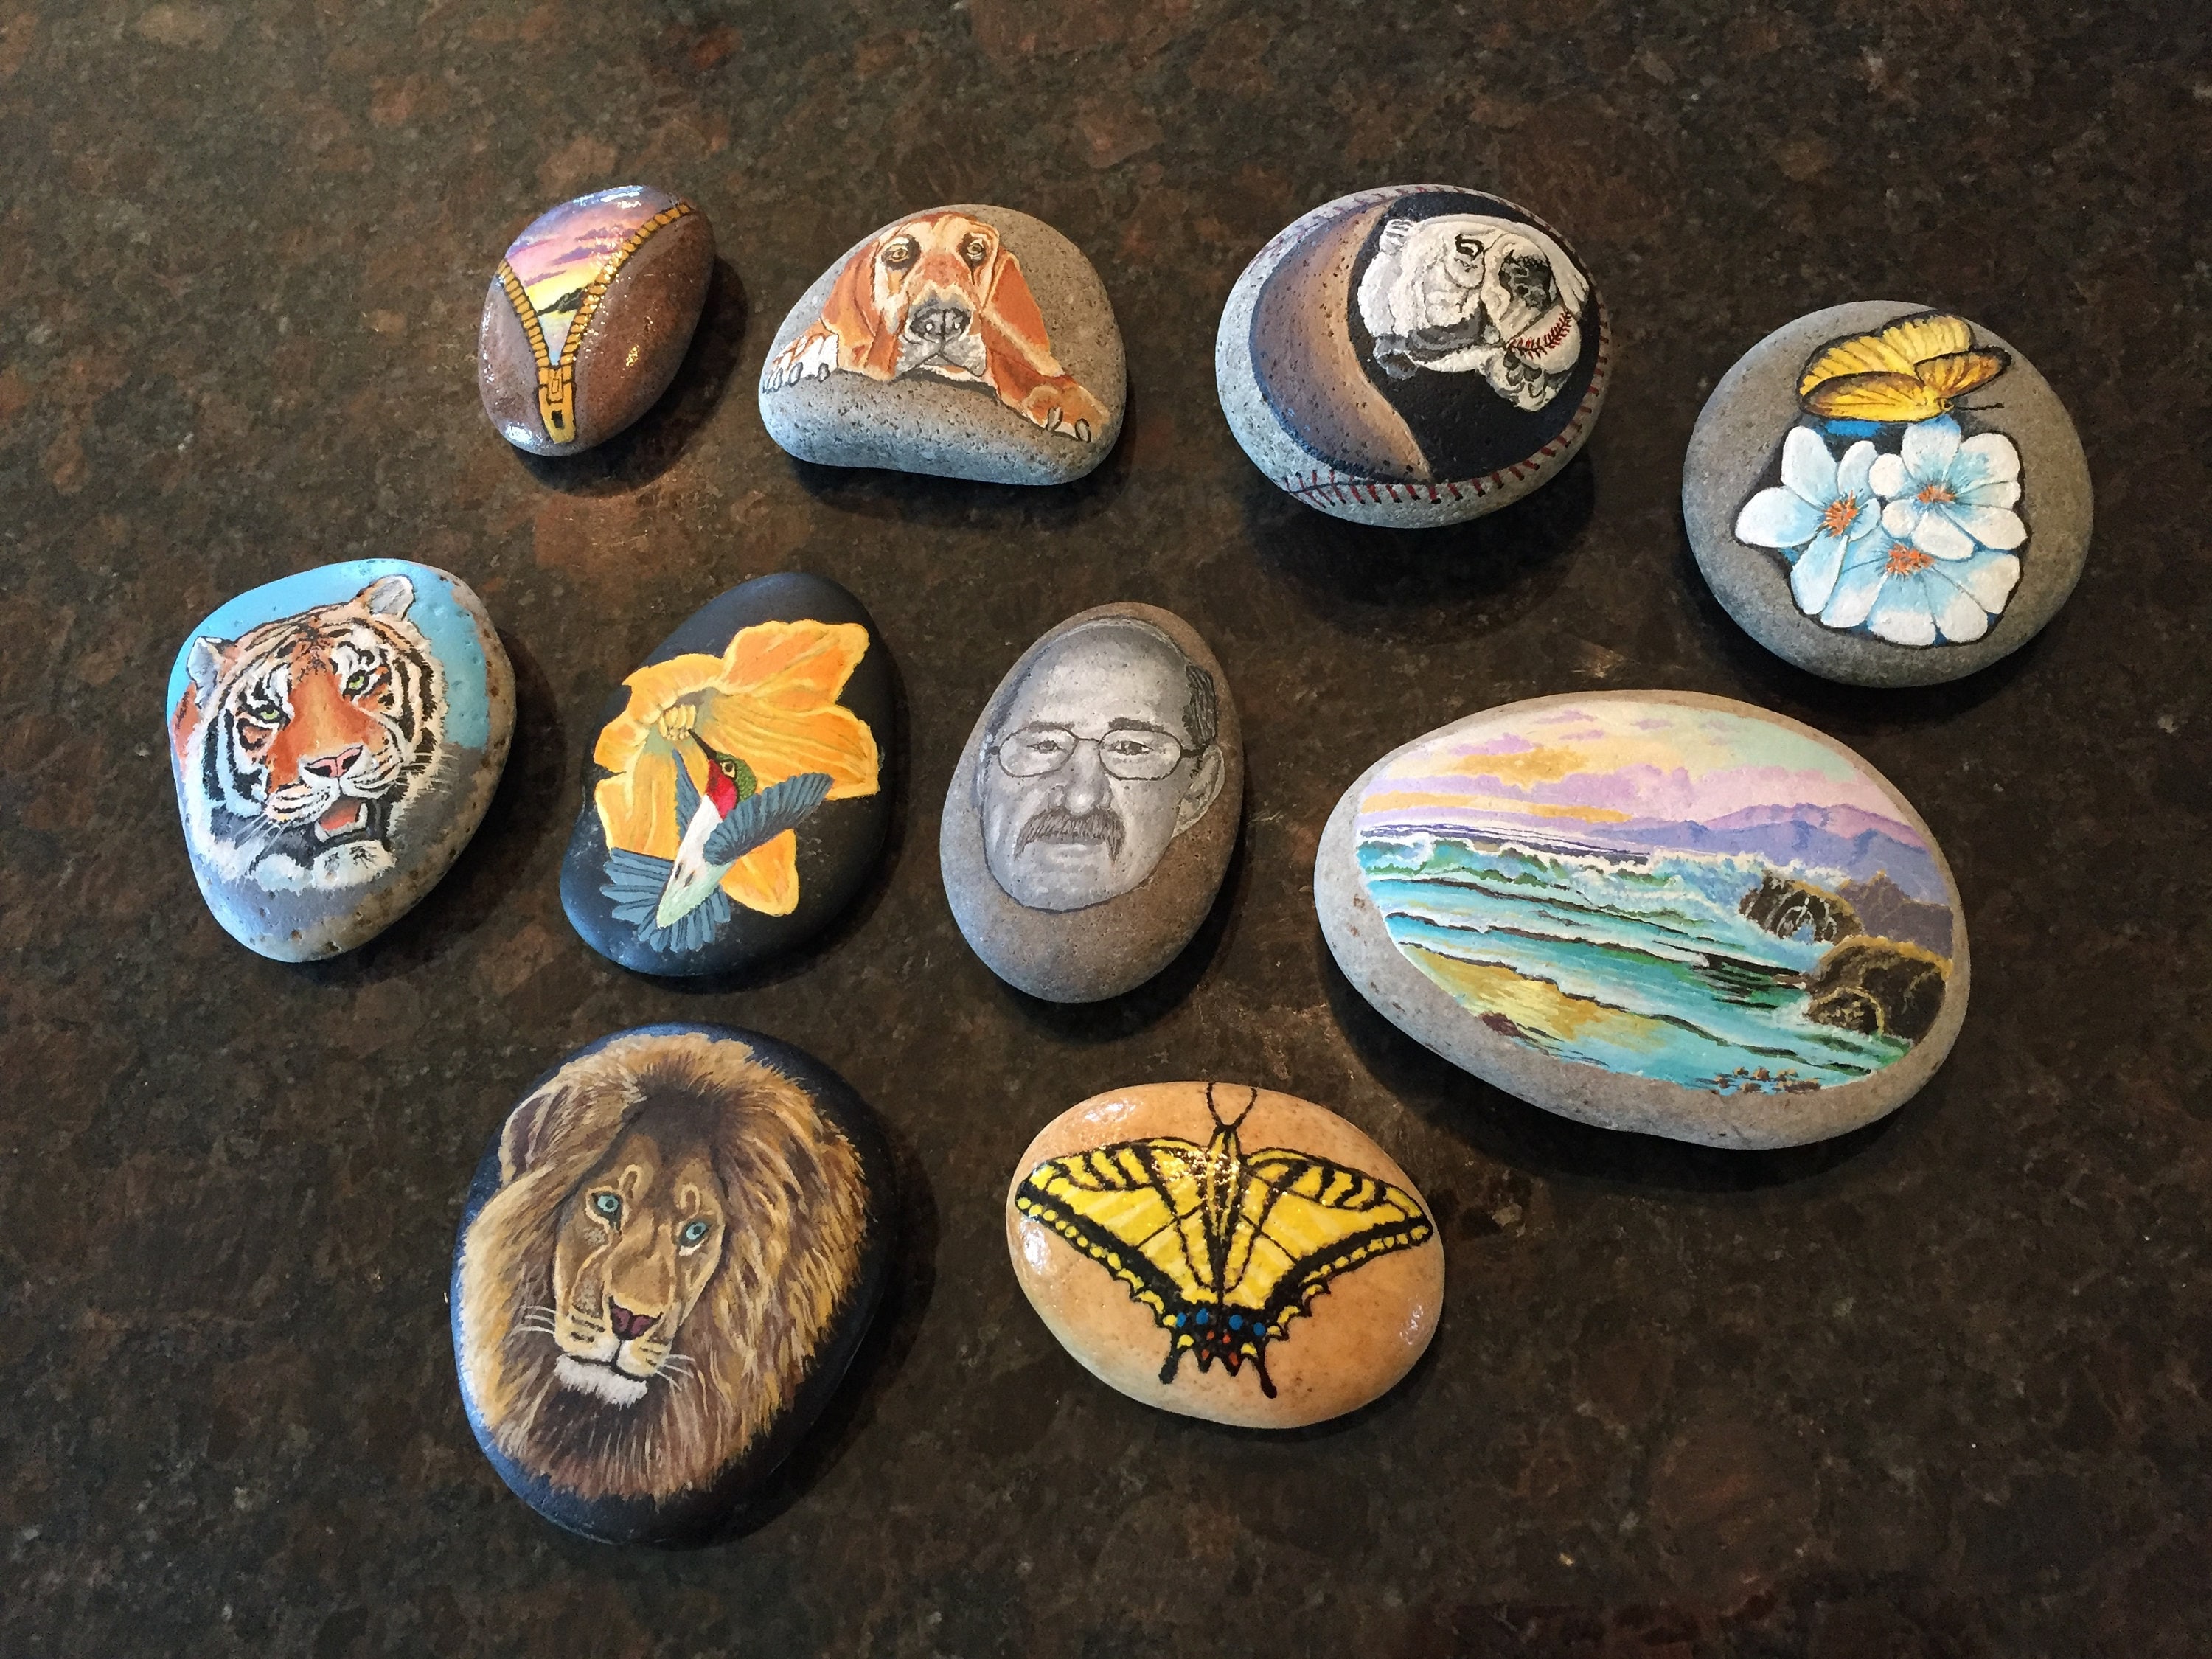 Paint it forward: painted rocks deliver messages of hope - The Columbian